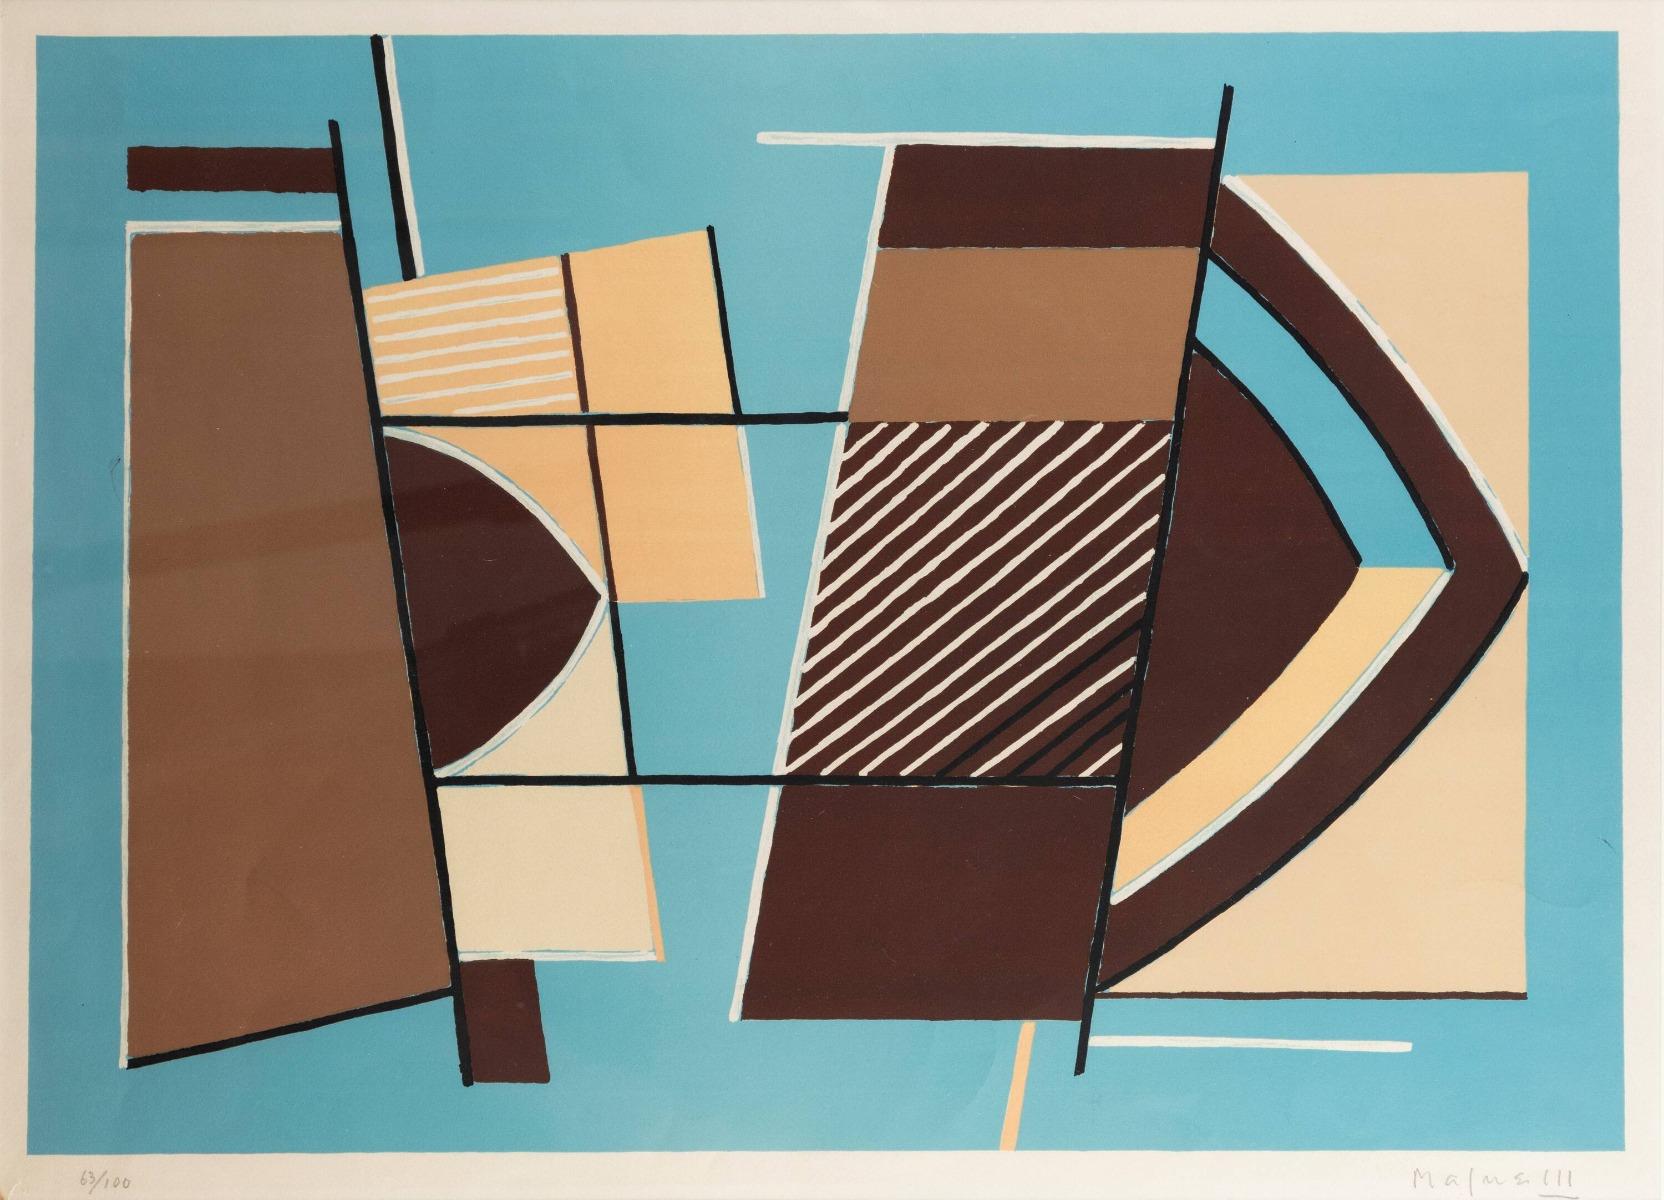 Abstract Composition  is a colored lithograph realized by Alberto Magnelli in 1960s.

The lithograph is hand-signed and hand-numbered in the lower margin.

Edition of 100 prints.

Good condition except for some very light stains.

Includes metal